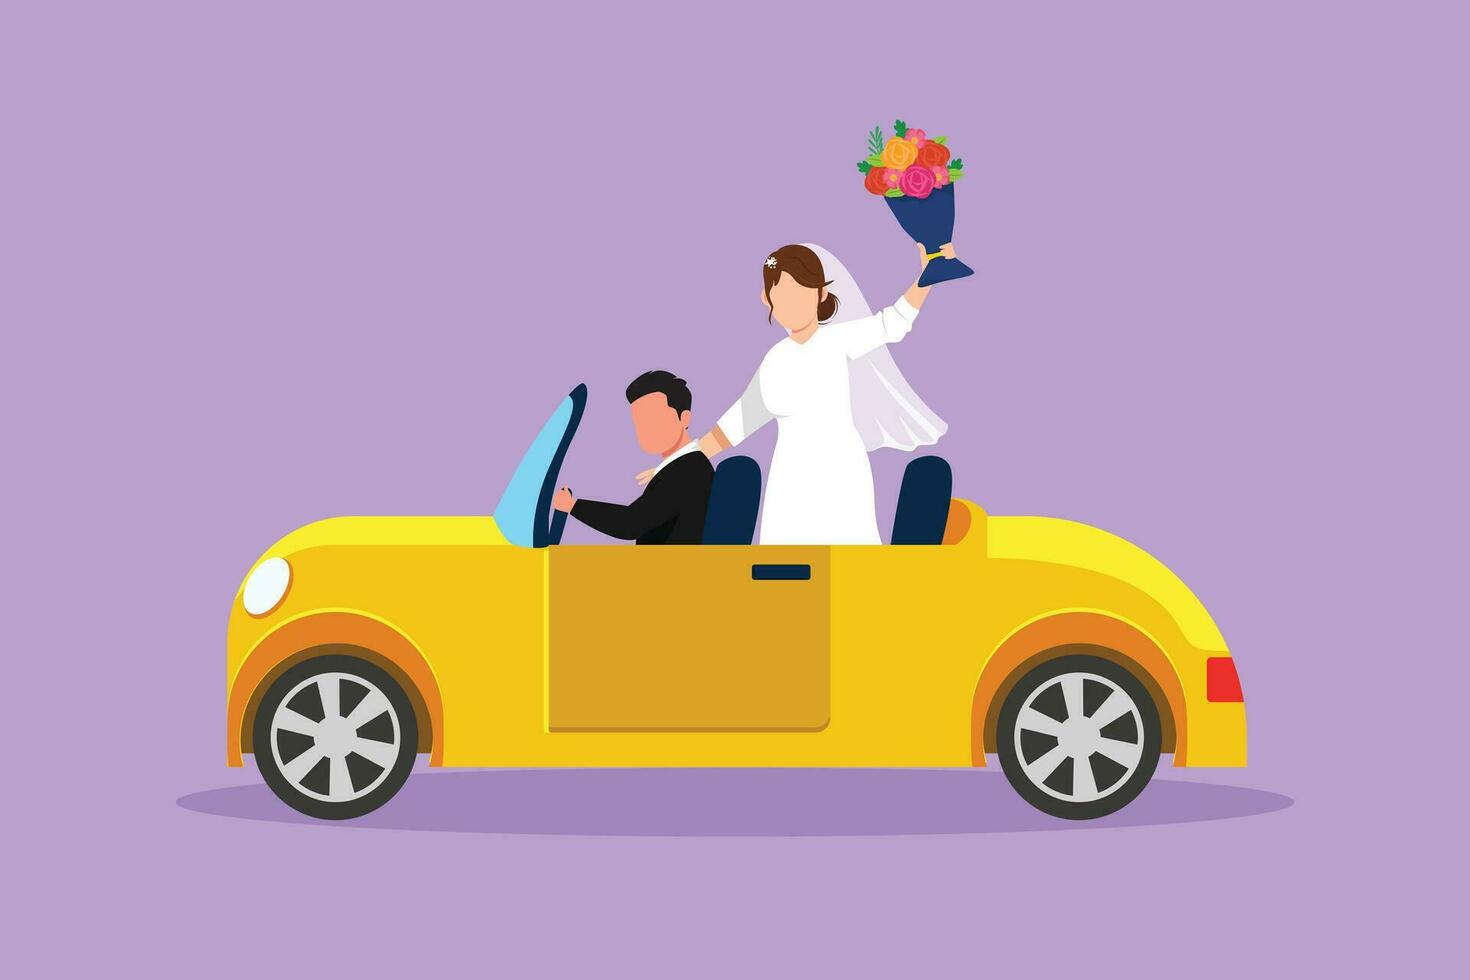 Character flat drawing newly married couple groom in vehicle waving bouquet of flowers. Happy man and woman riding wedding car. Married couple romantic relationship. Cartoon design vector illustration